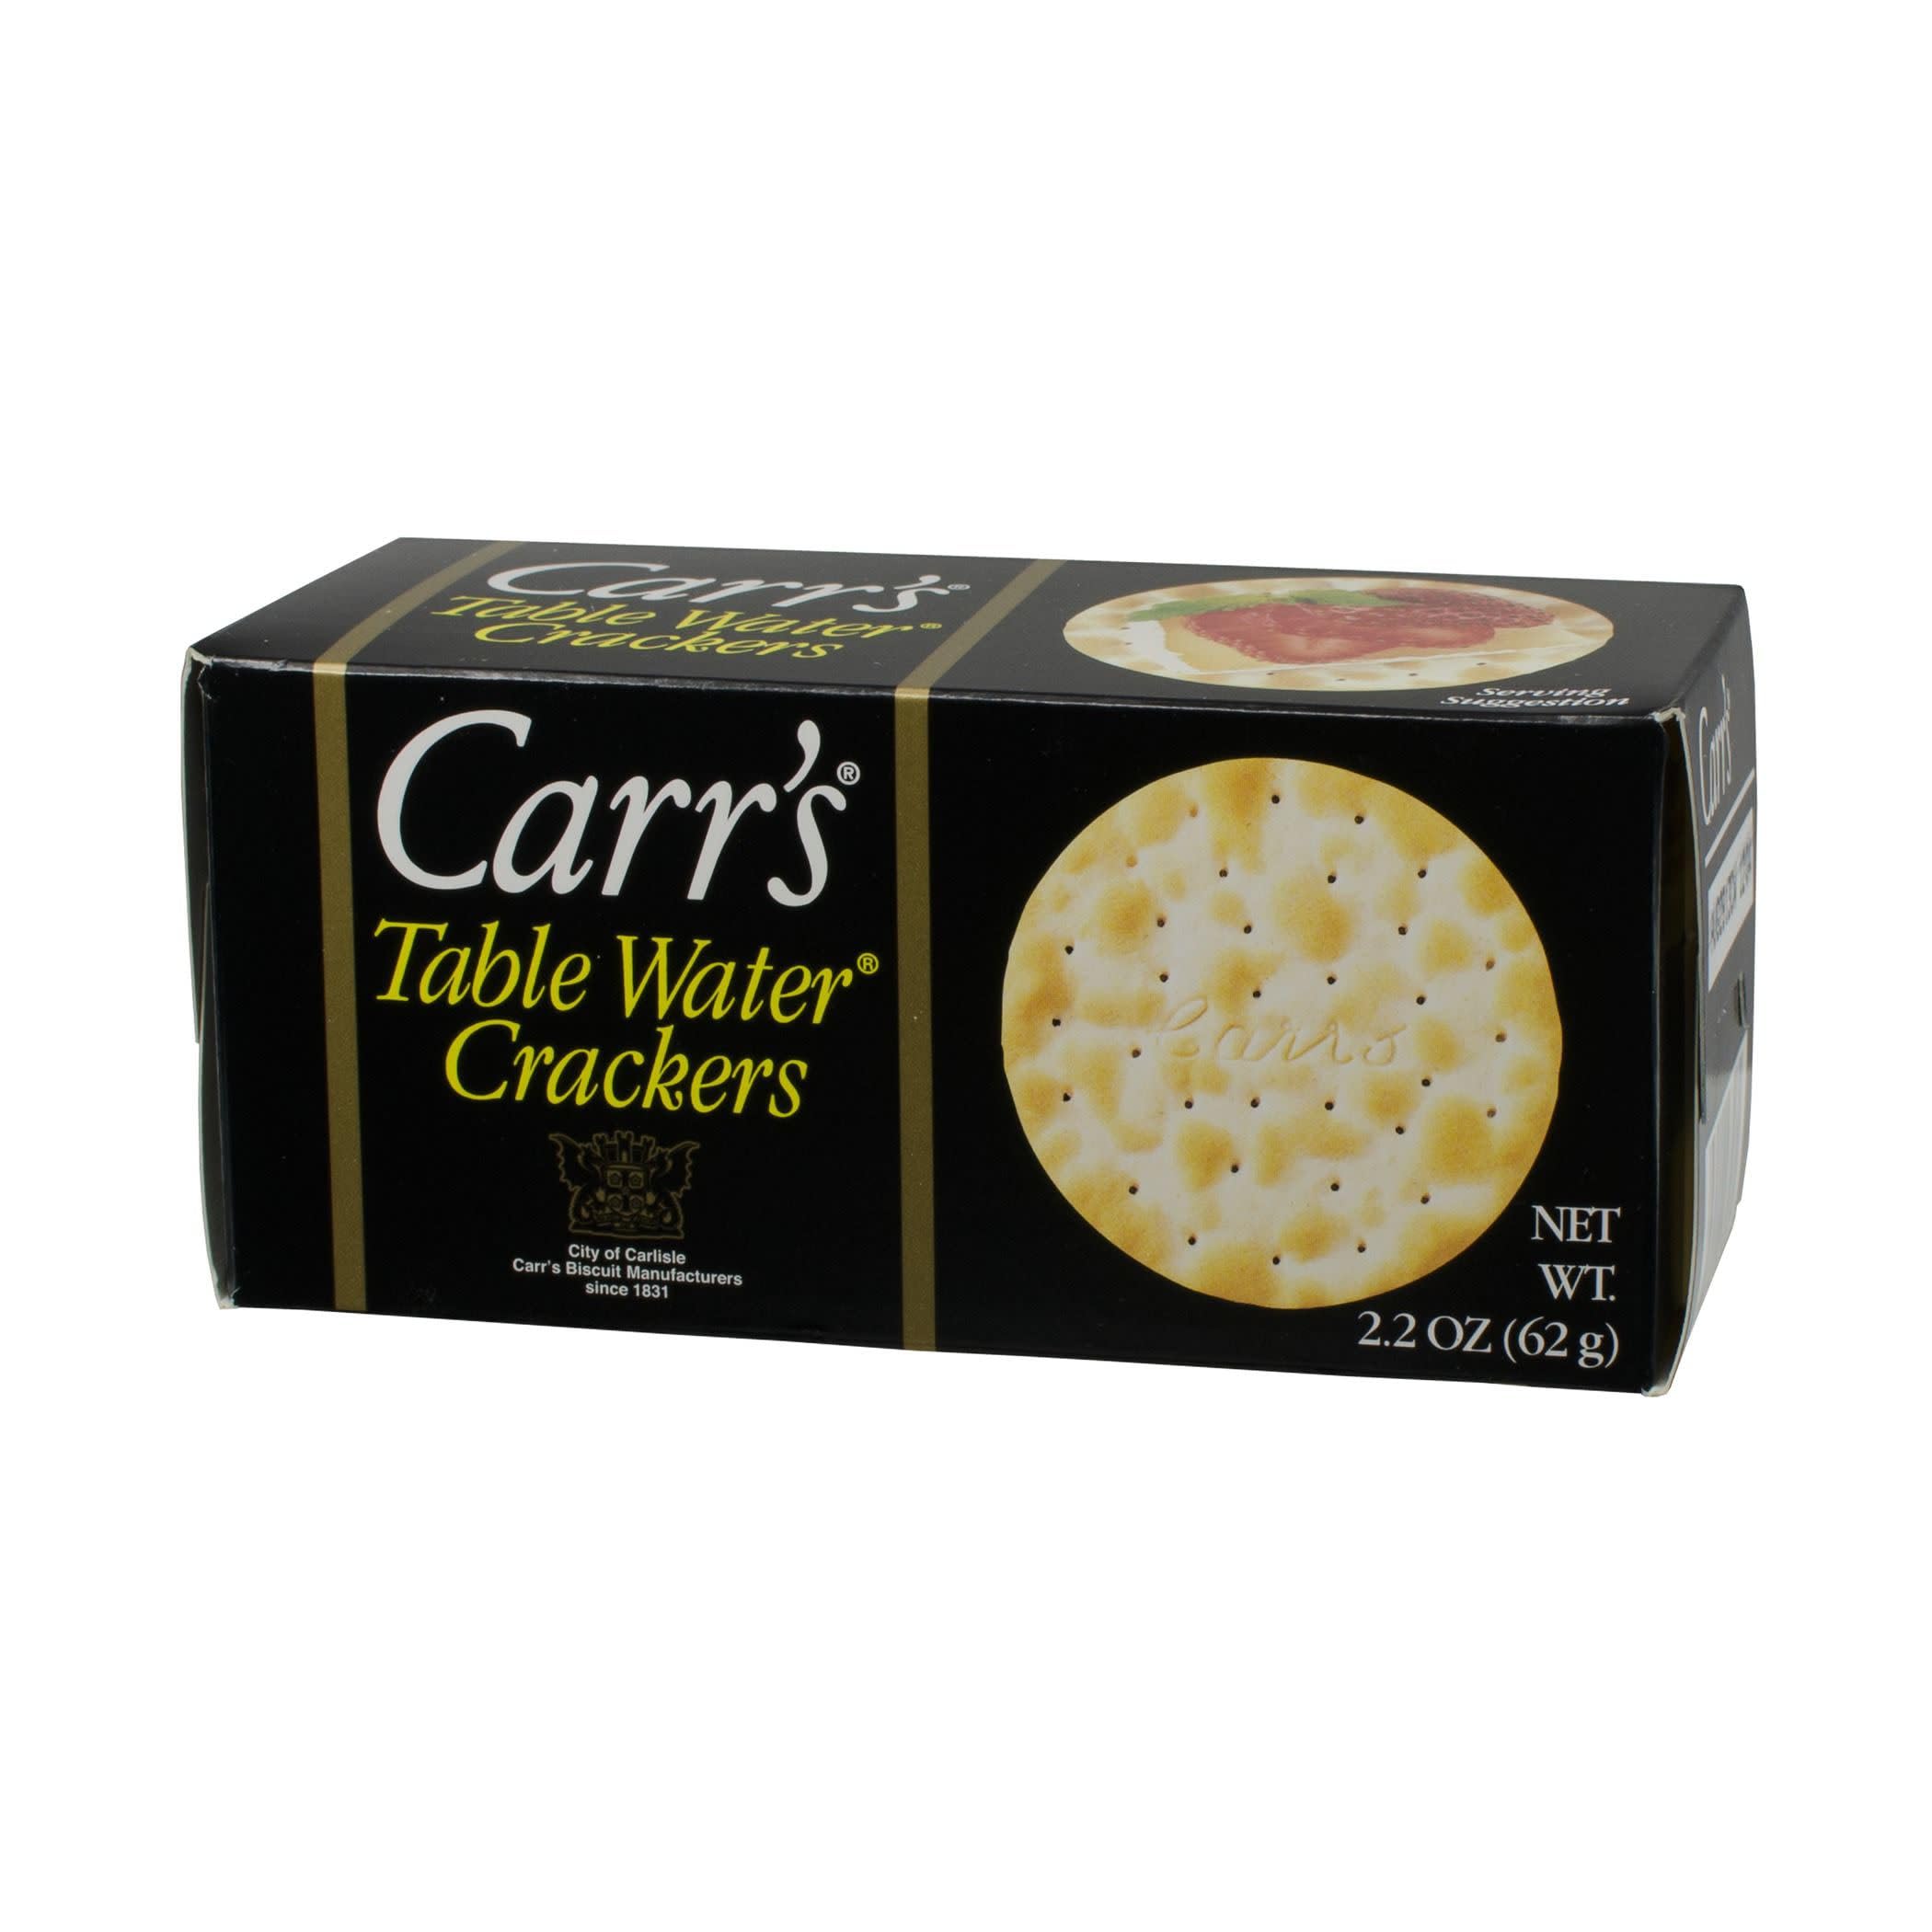 Carr's Table Water Crackers, Original, 2.2oz